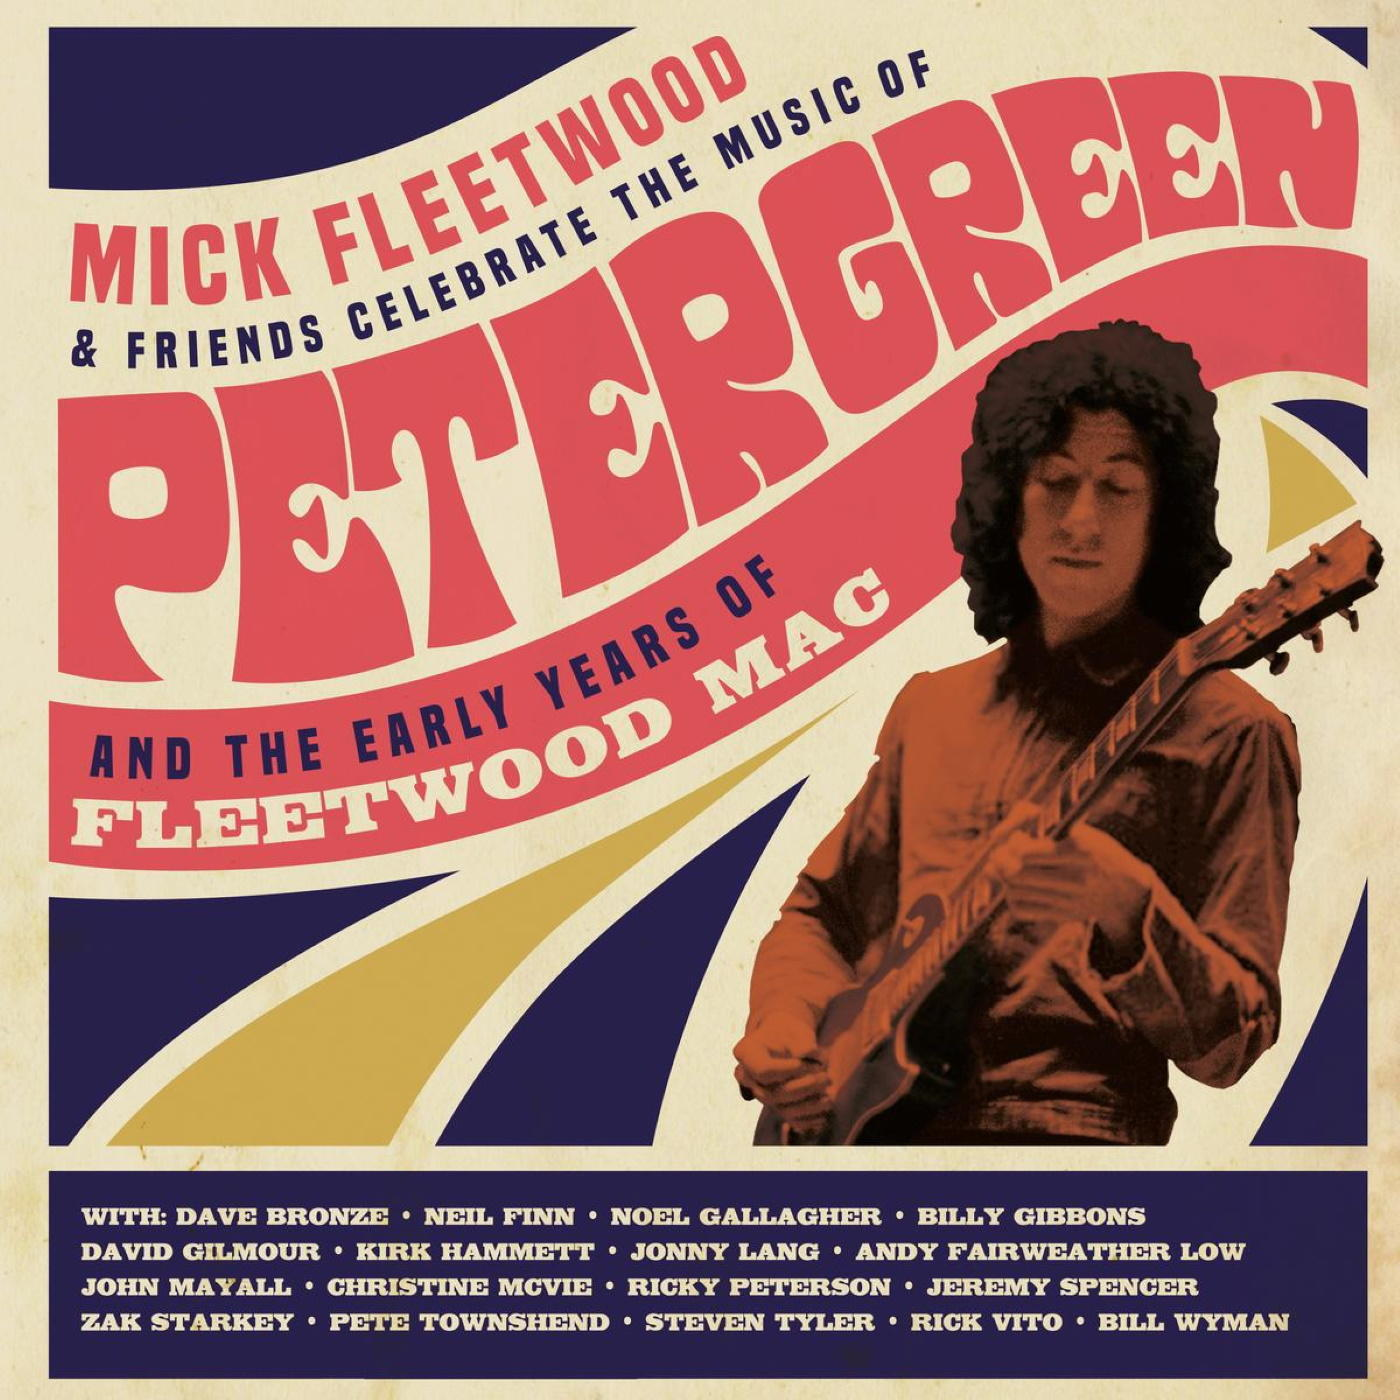 Mick And Friends Peter Green of Fleetwood the - the (CD) Music - and Y Early Celebrate